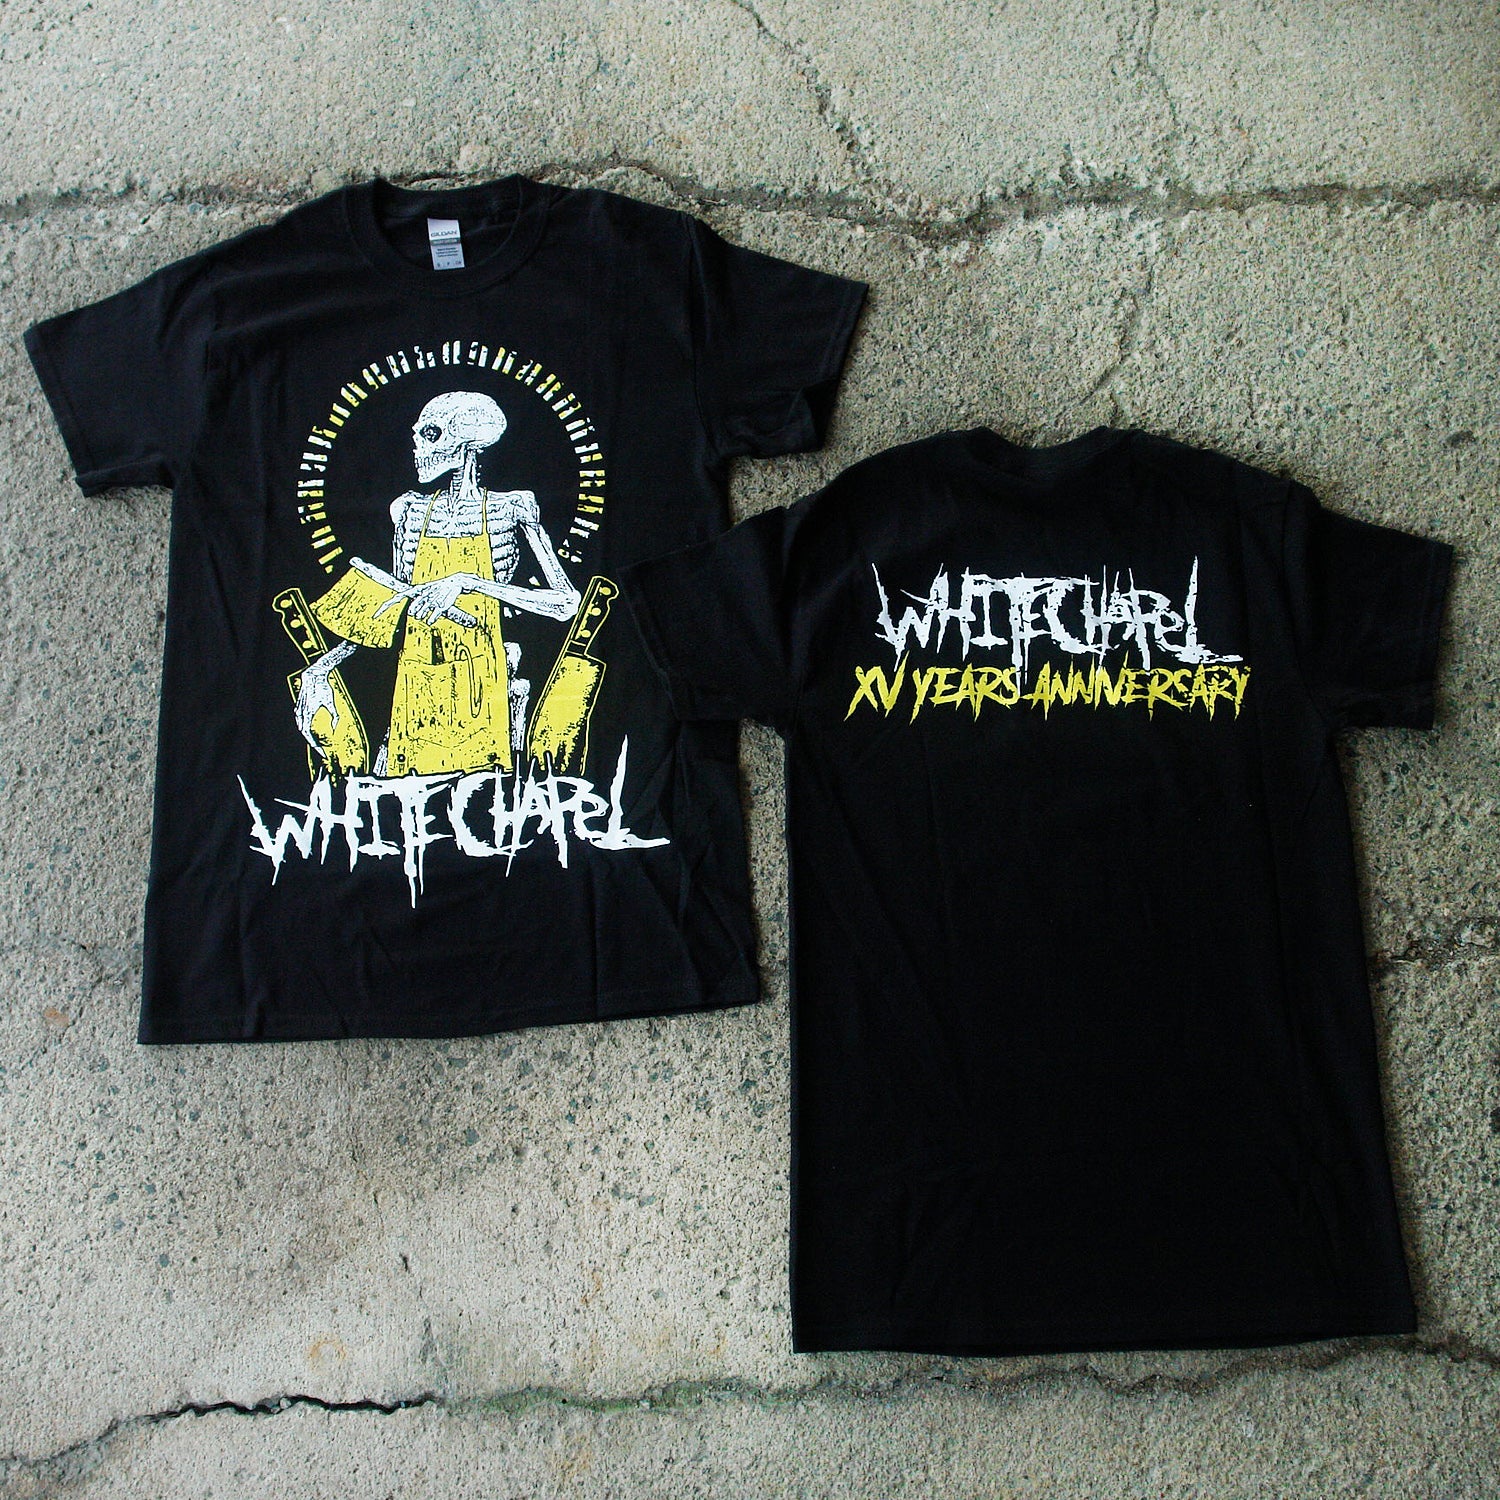 Image of the front and back of a black tshirt against a grey concrete background. The front of the shirt has a yellow skeleton sitting down with its head facing to the left, wearing a yellow apron and holding a yellow knife. Two other knifes are on each side of the skeleton. Below this in white heavy metal style font reads 